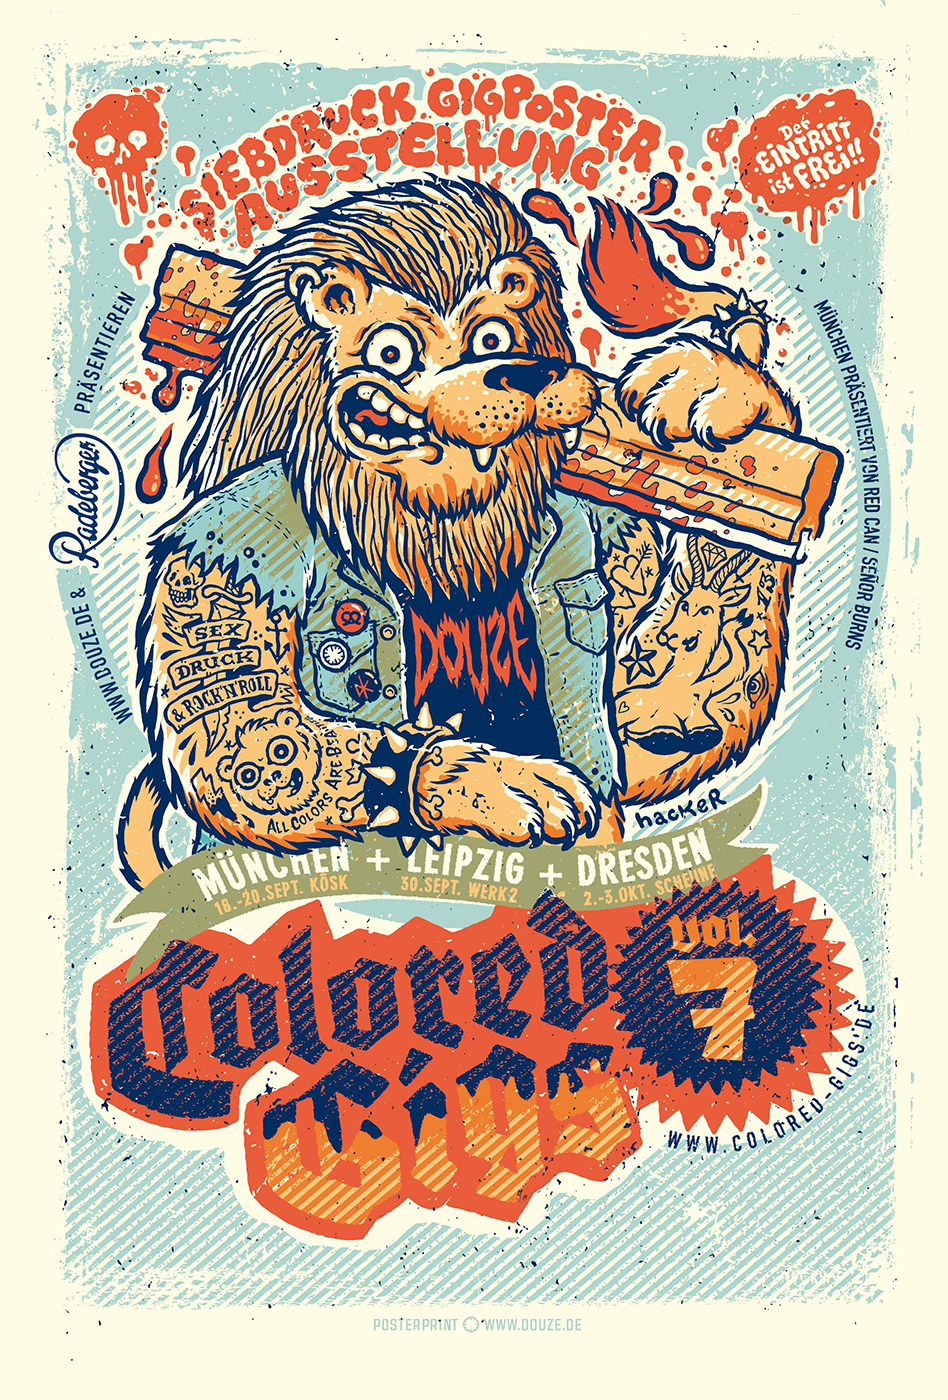 Colored Gigs poster by Michael Hacker and Lars P. Krause